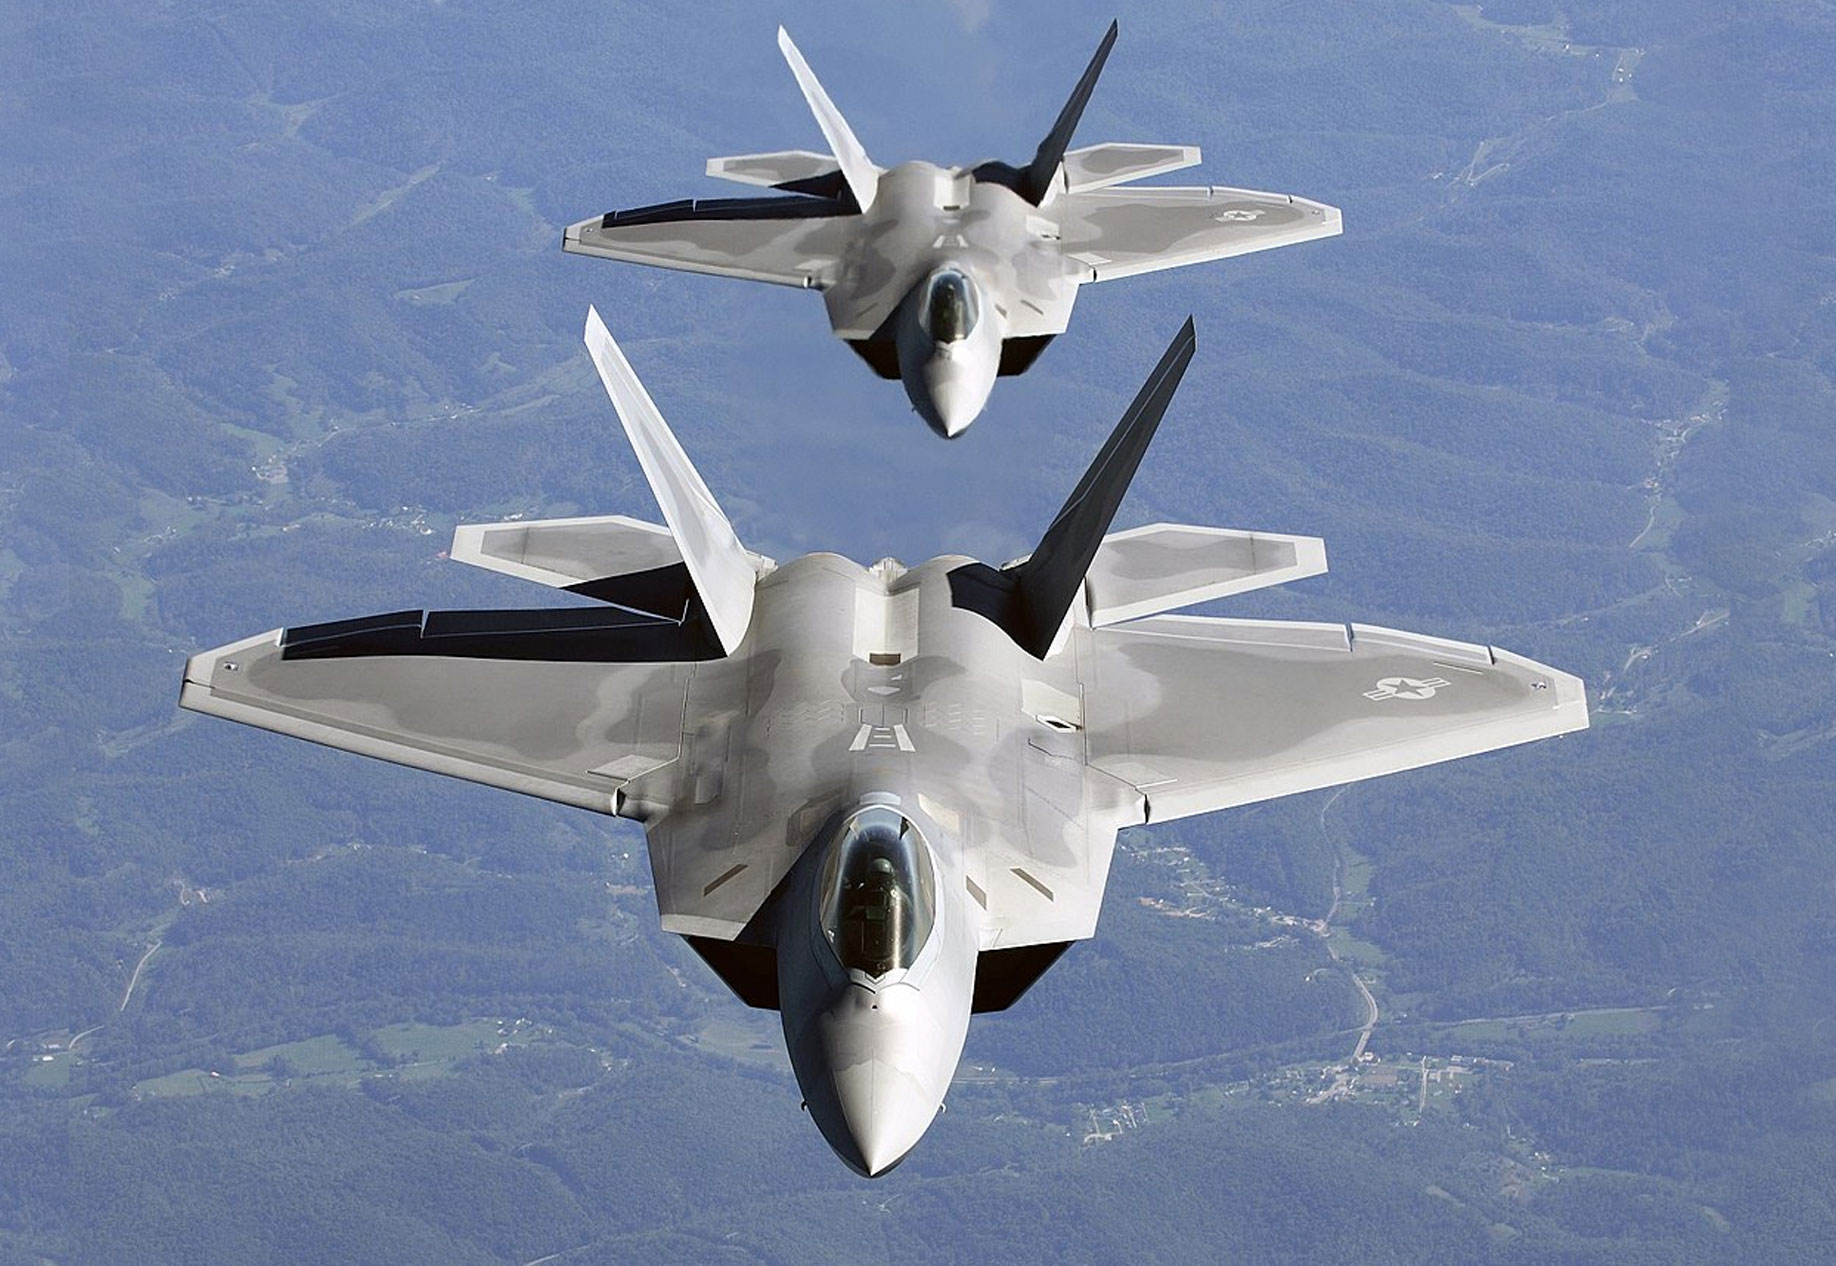 The-F-22-Raptor-Facts-30-Things-to-Know.